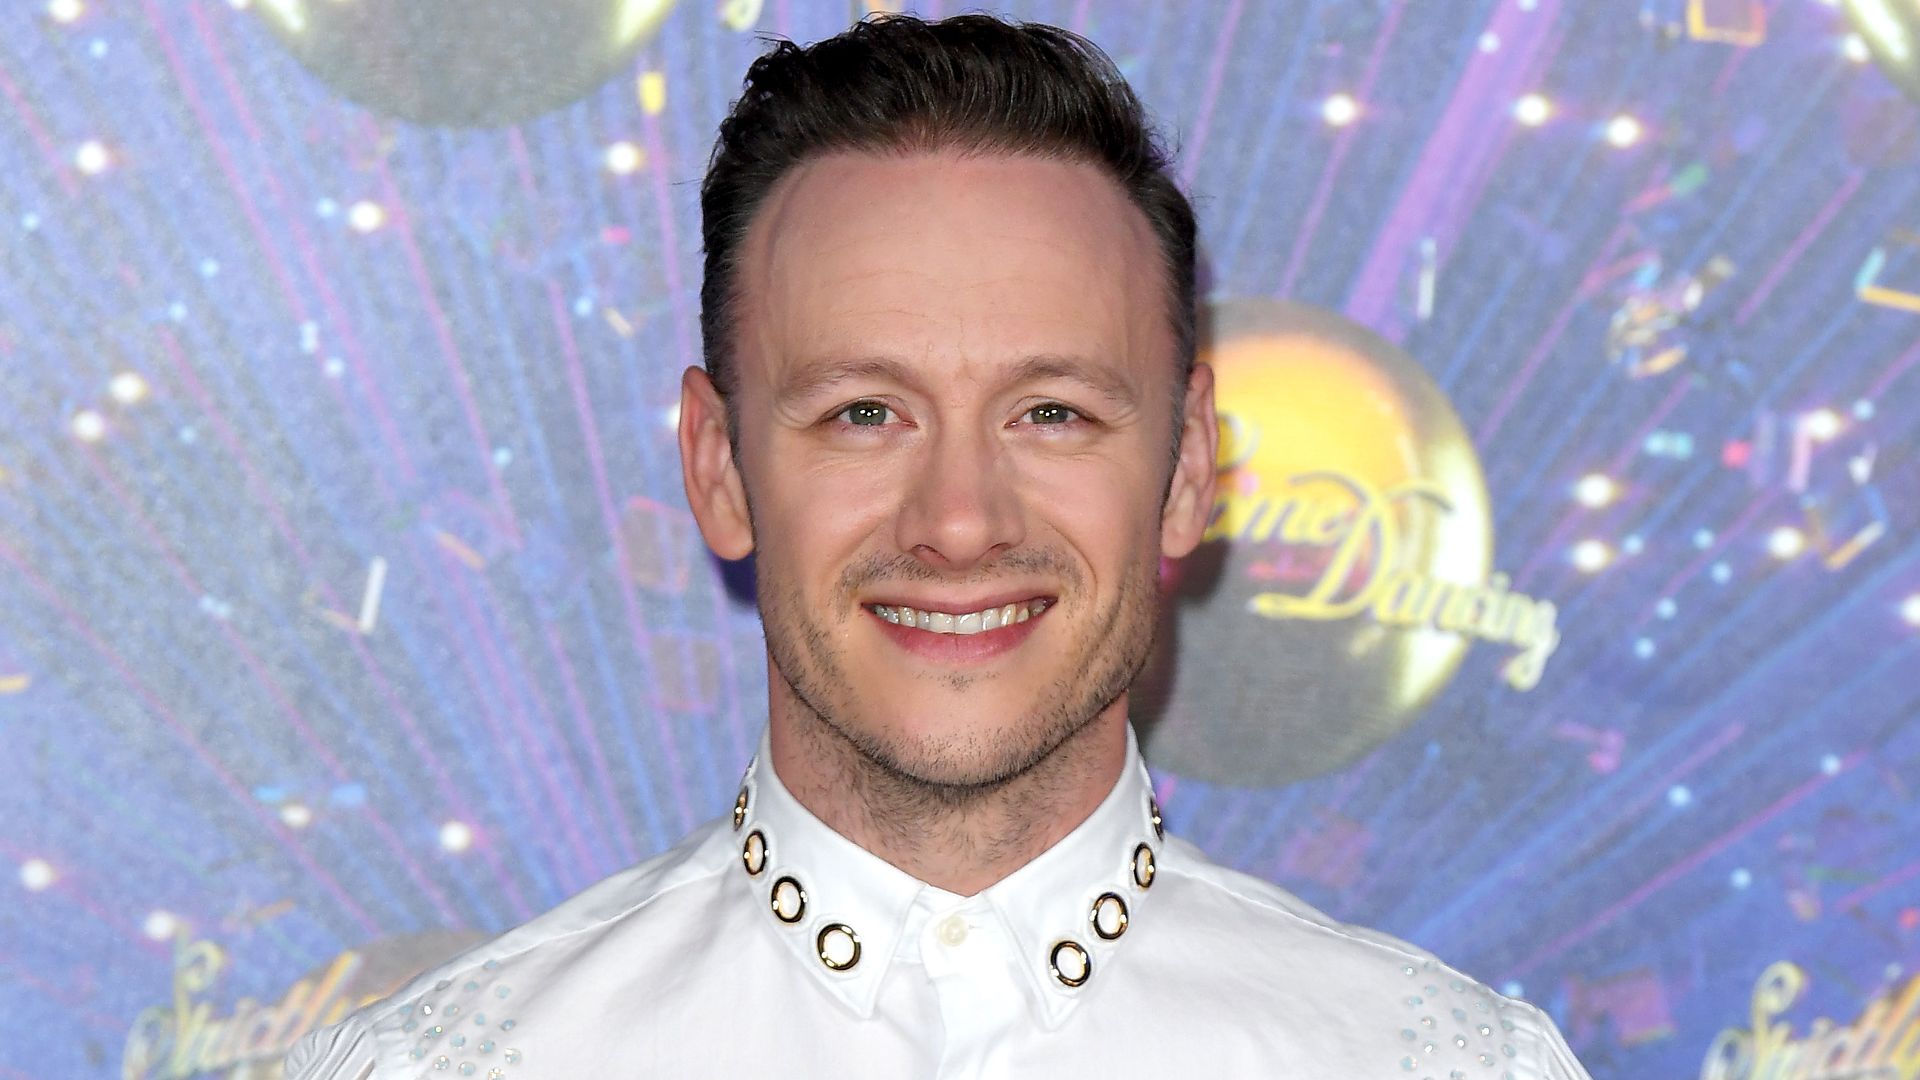 Kevin Clifton attends Strictly Come Dancing launch in 2019